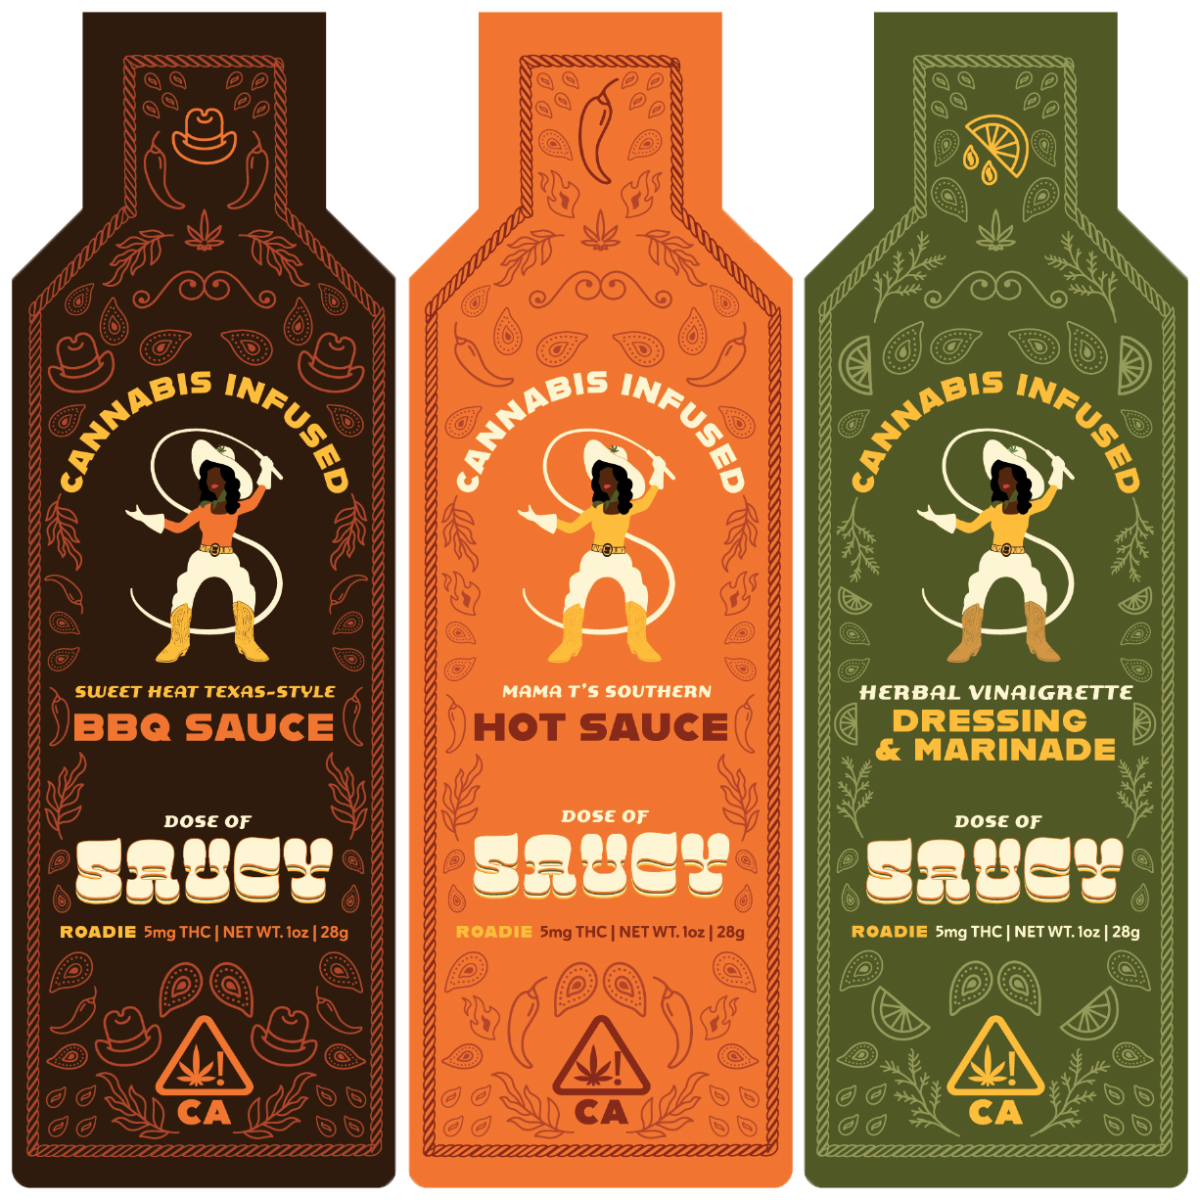 Three bottle-shaped condiment packets